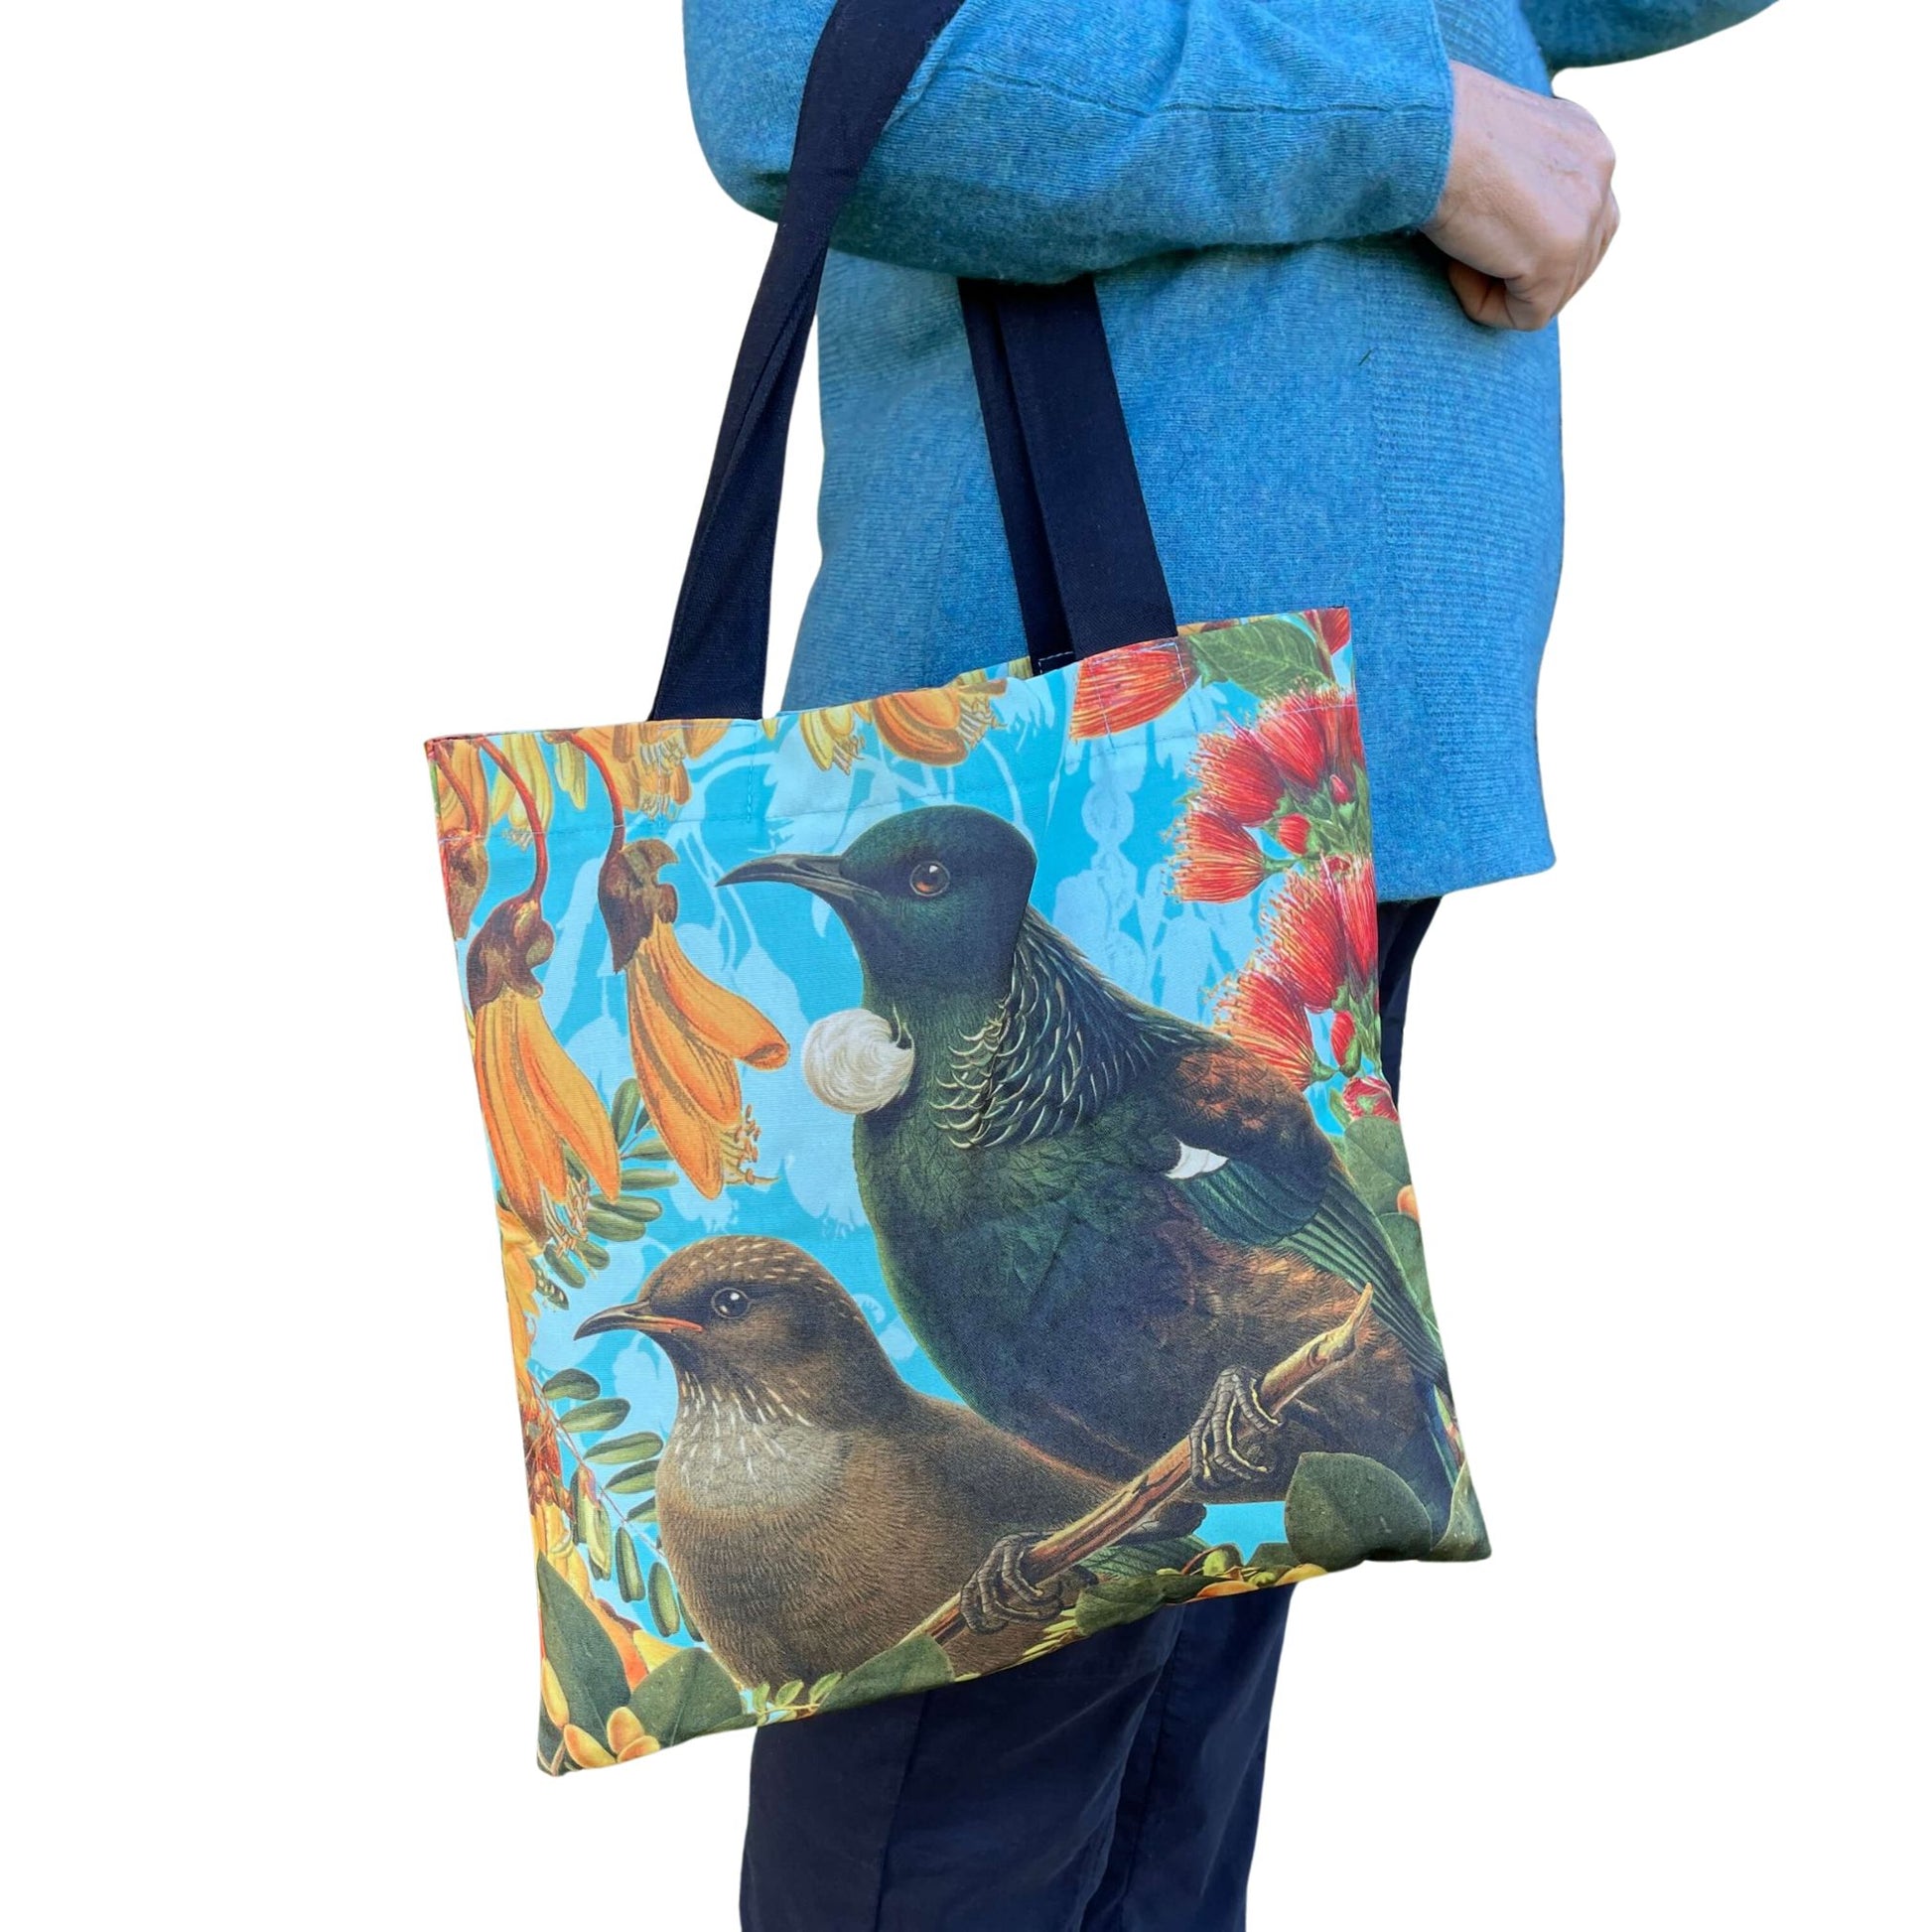 Woman with a tote bag over her arm. The tote features a Bellbird & Tui amongst Kowhai & Pohutukawa flowers.